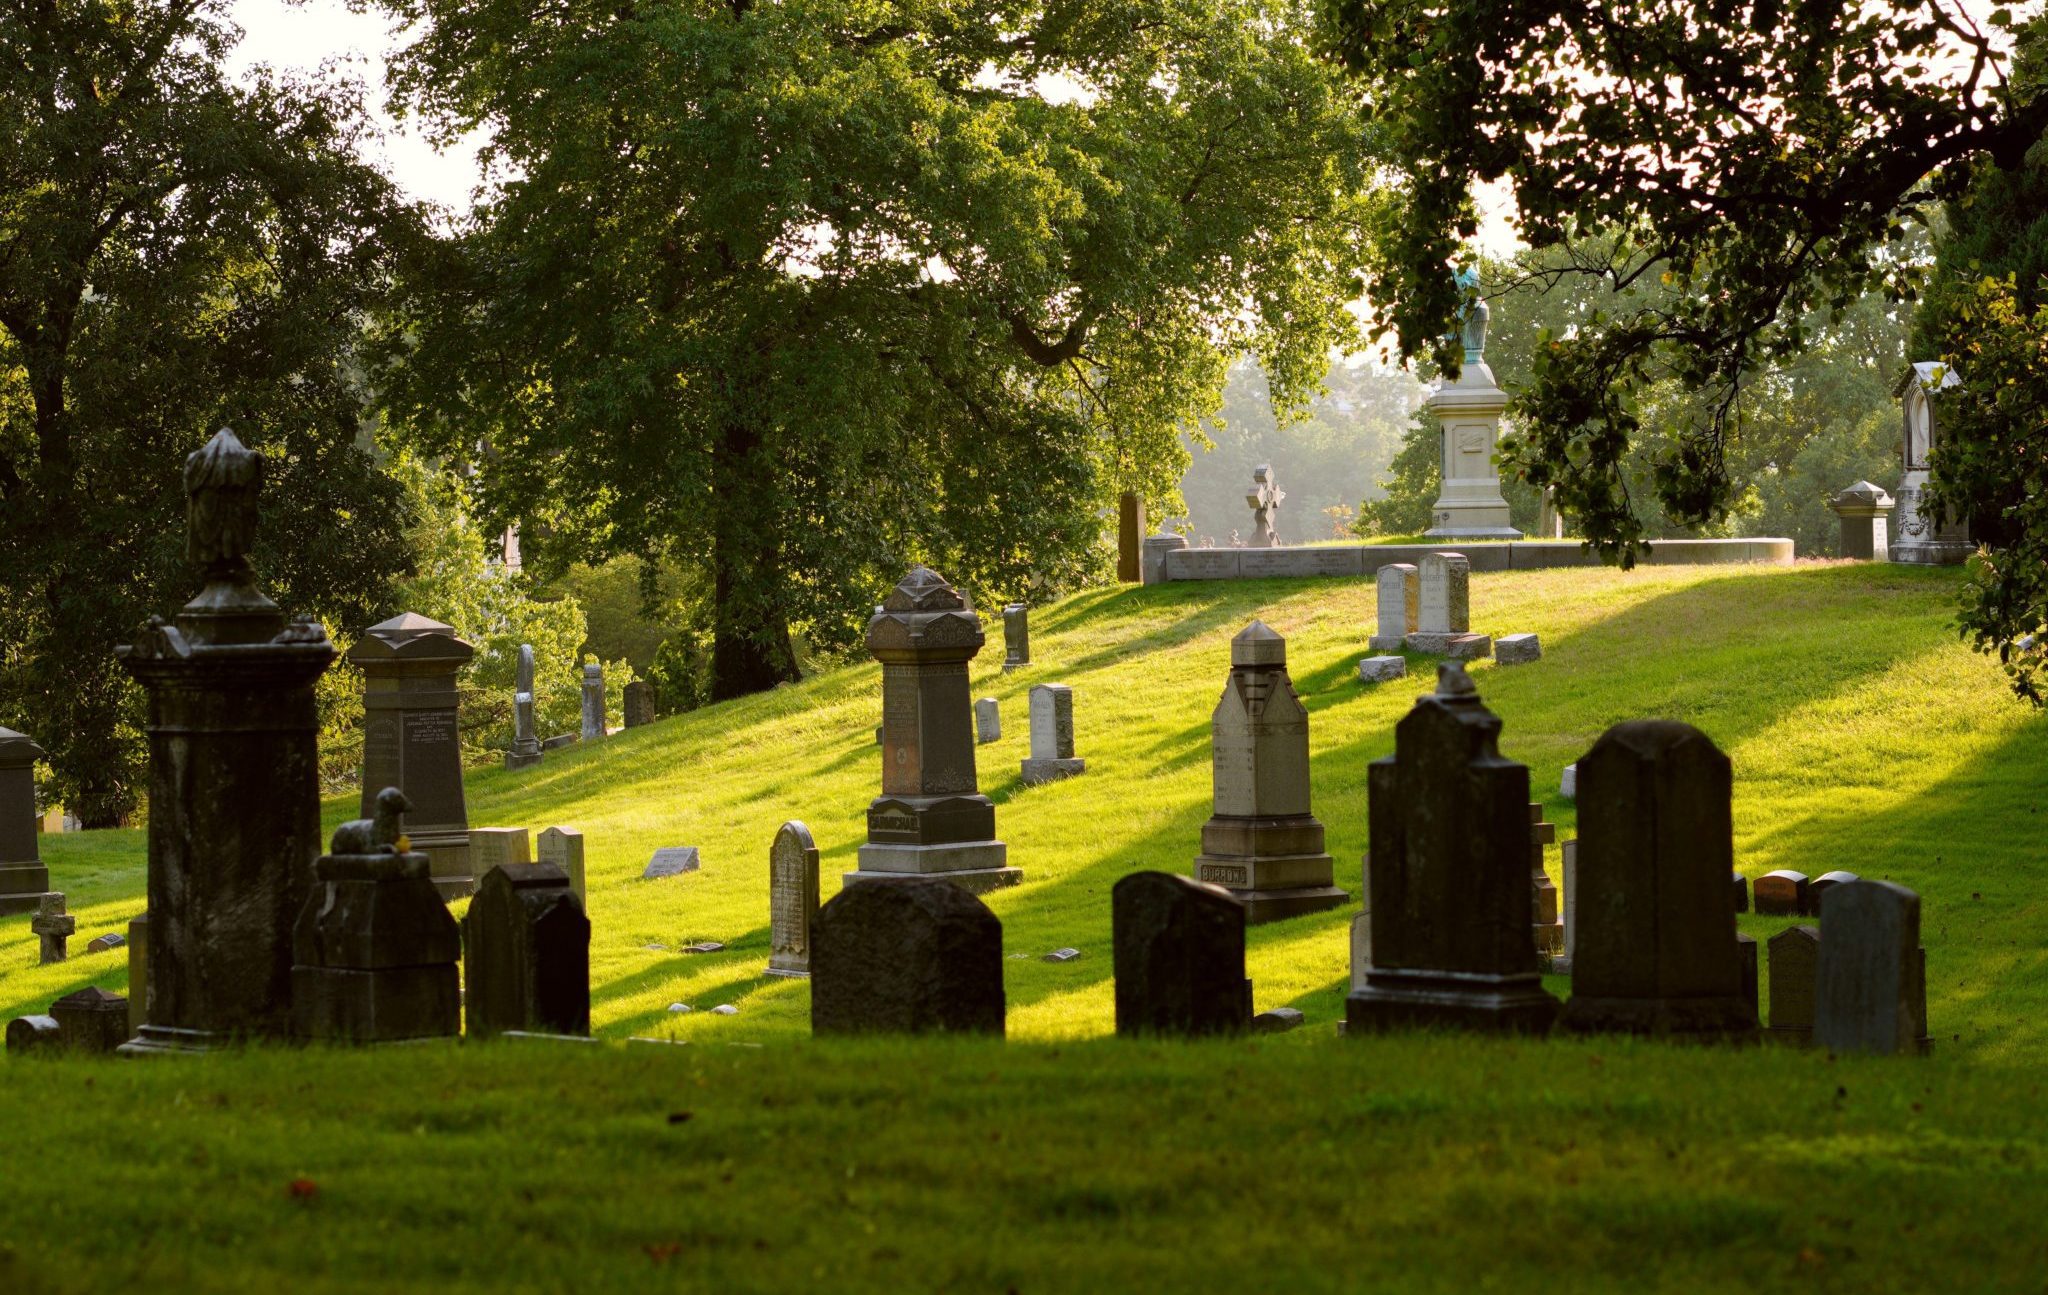 Cemeteries Remind Us the Importance of Religion